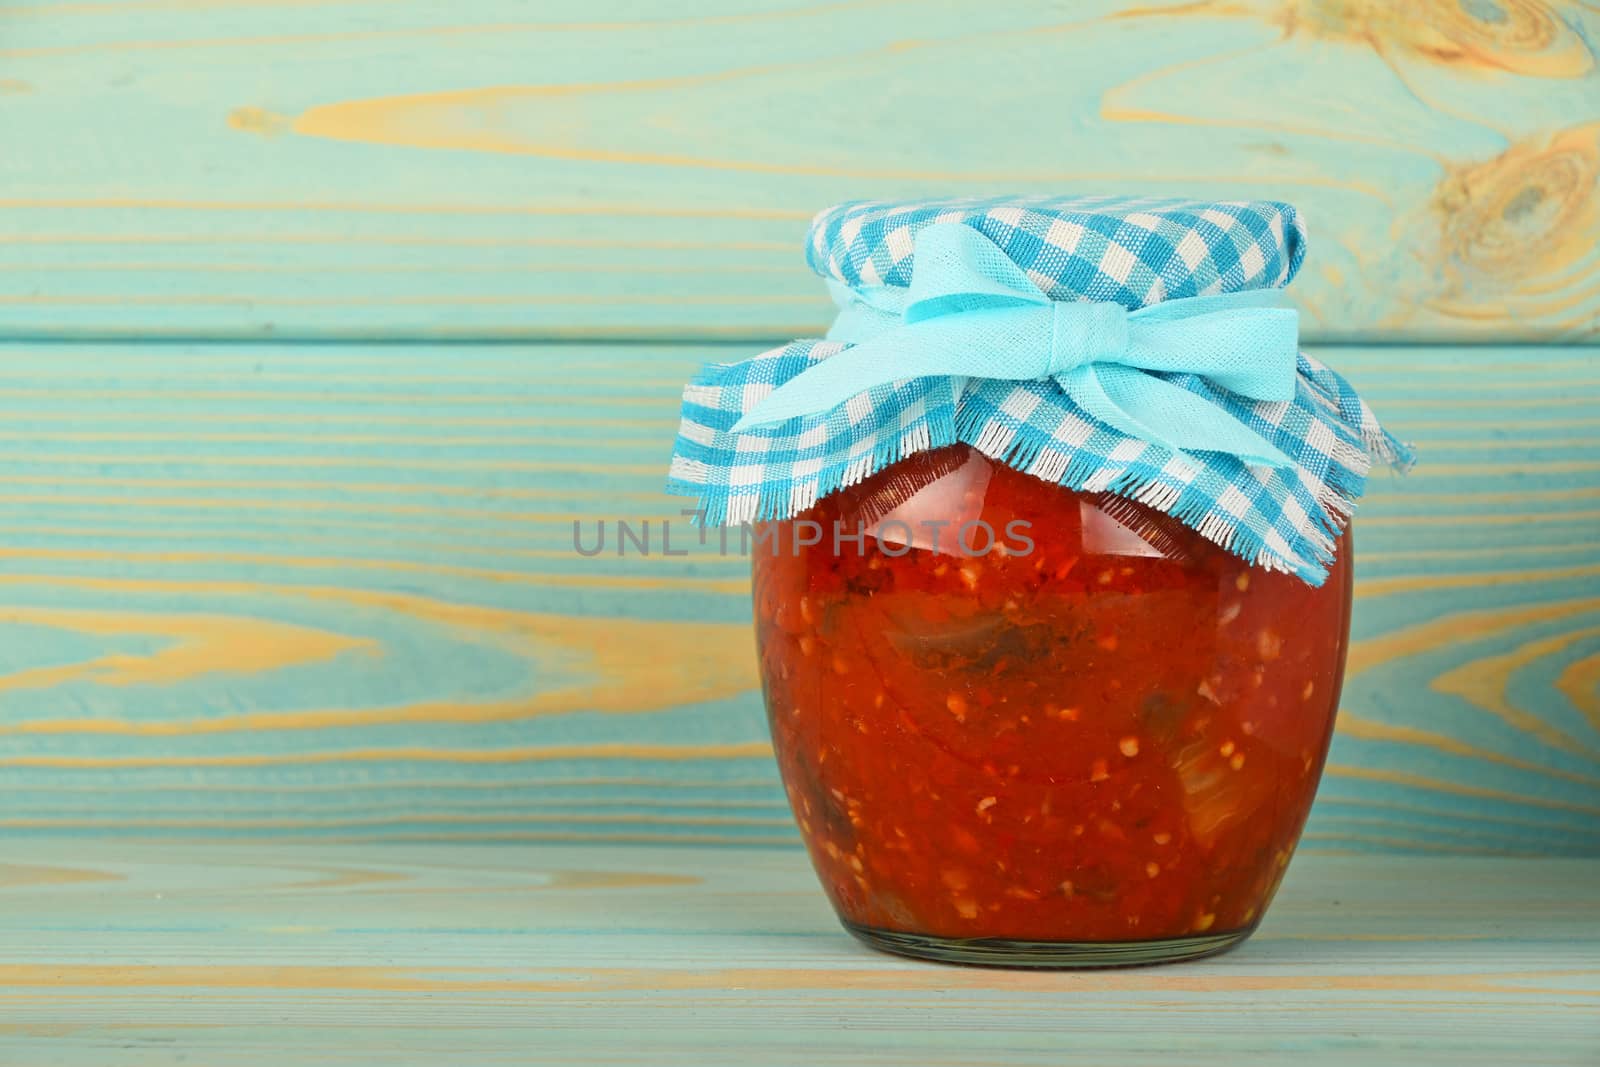 One glass jar of homemade pickled pepper, paprika and eggplant salad with checkered textile top decoration at blue painted vintage wooden surface